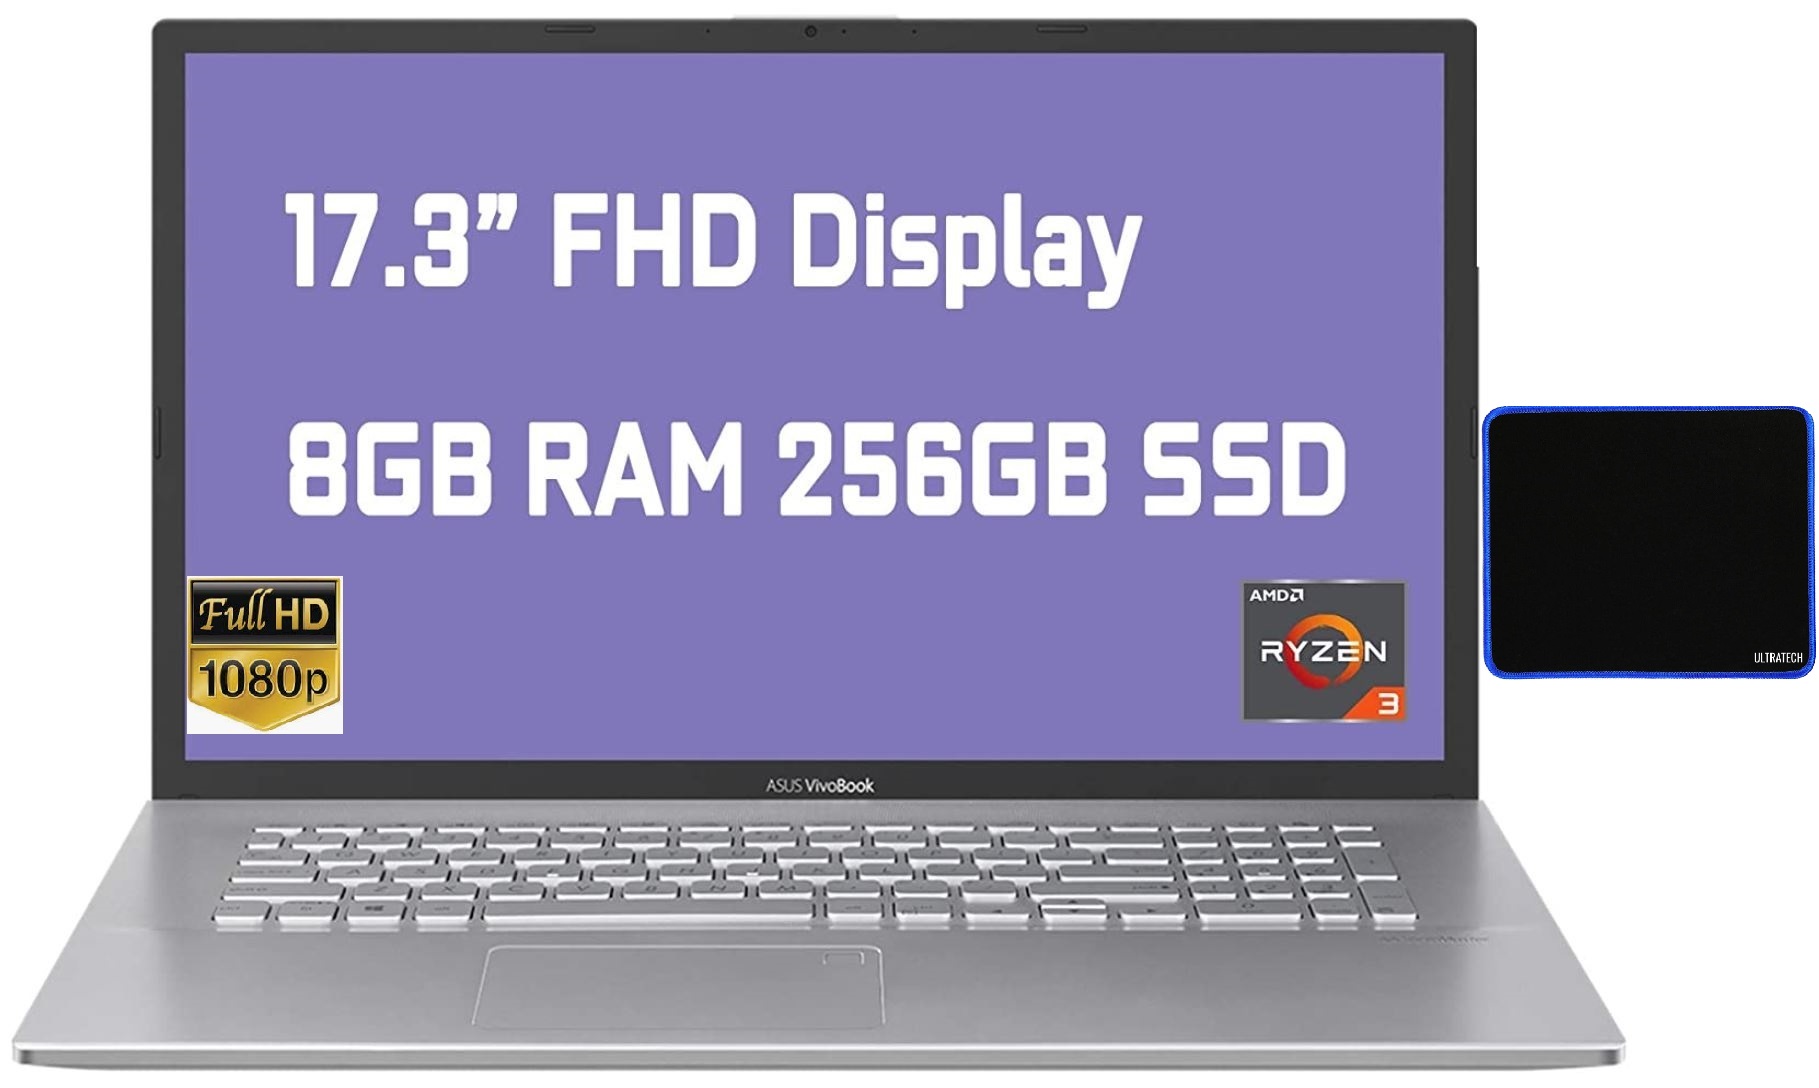 Flagship Asus VivoBook 17 Business Laptop 17.3” FHD Display AMD Ryzen 3 3250U Processor 8GB RAM 256GB SSD USB-C HDMI SonicMaster Win10 with UltraTech Mouse Pad Bundled - image 1 of 8